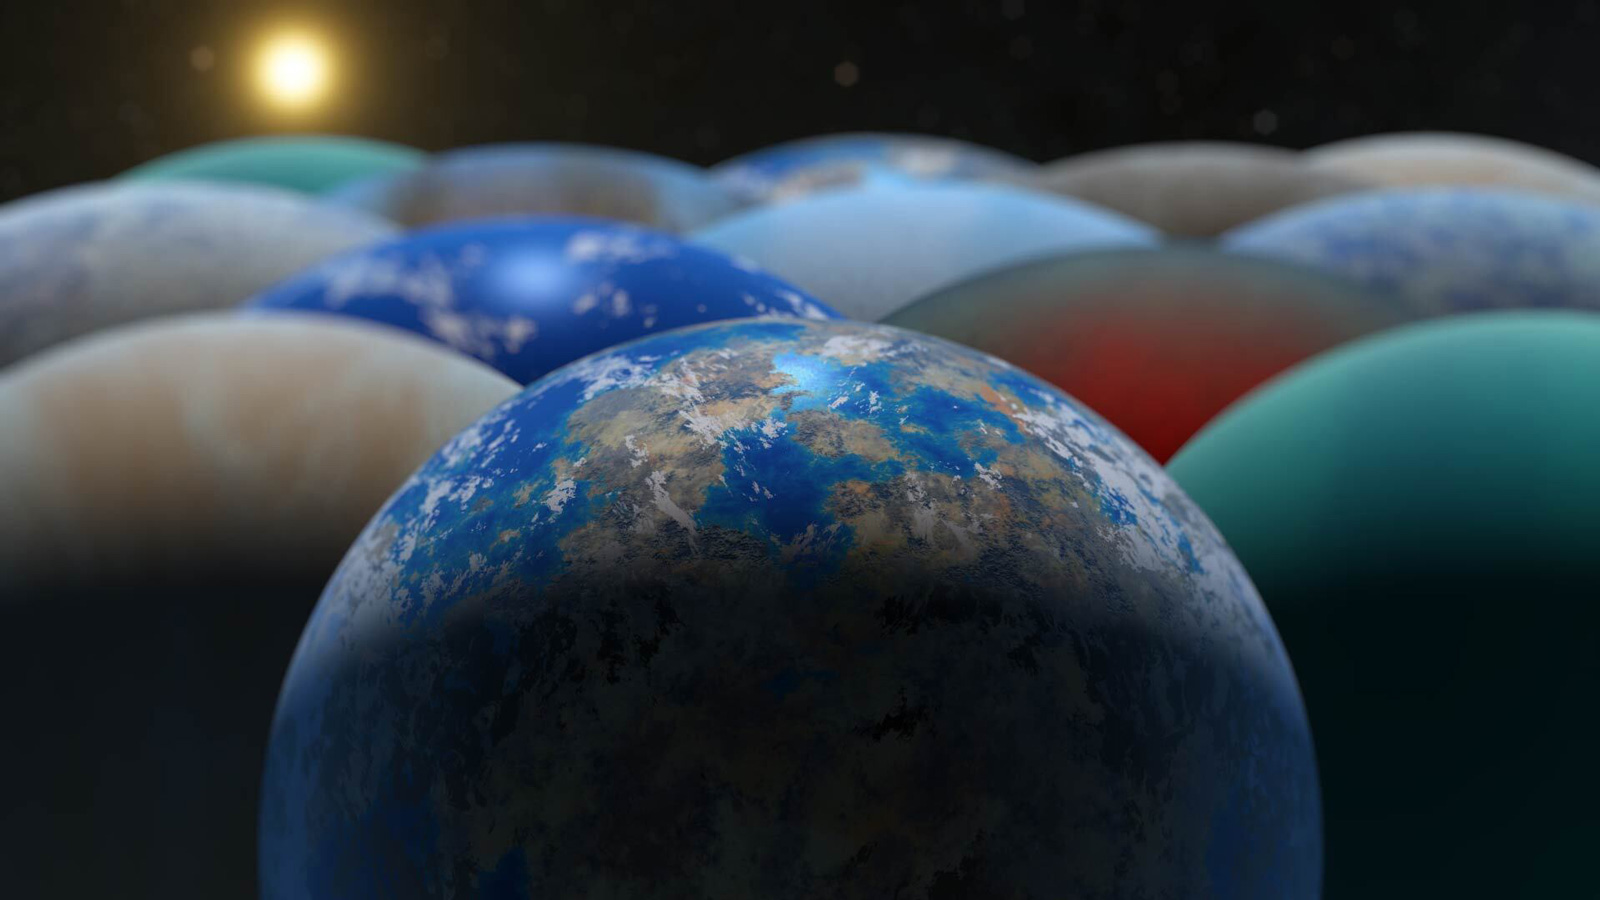 slide 3 - An artist's illustration shows many different exoplanets in many colors grouped together with a distant star in the background.